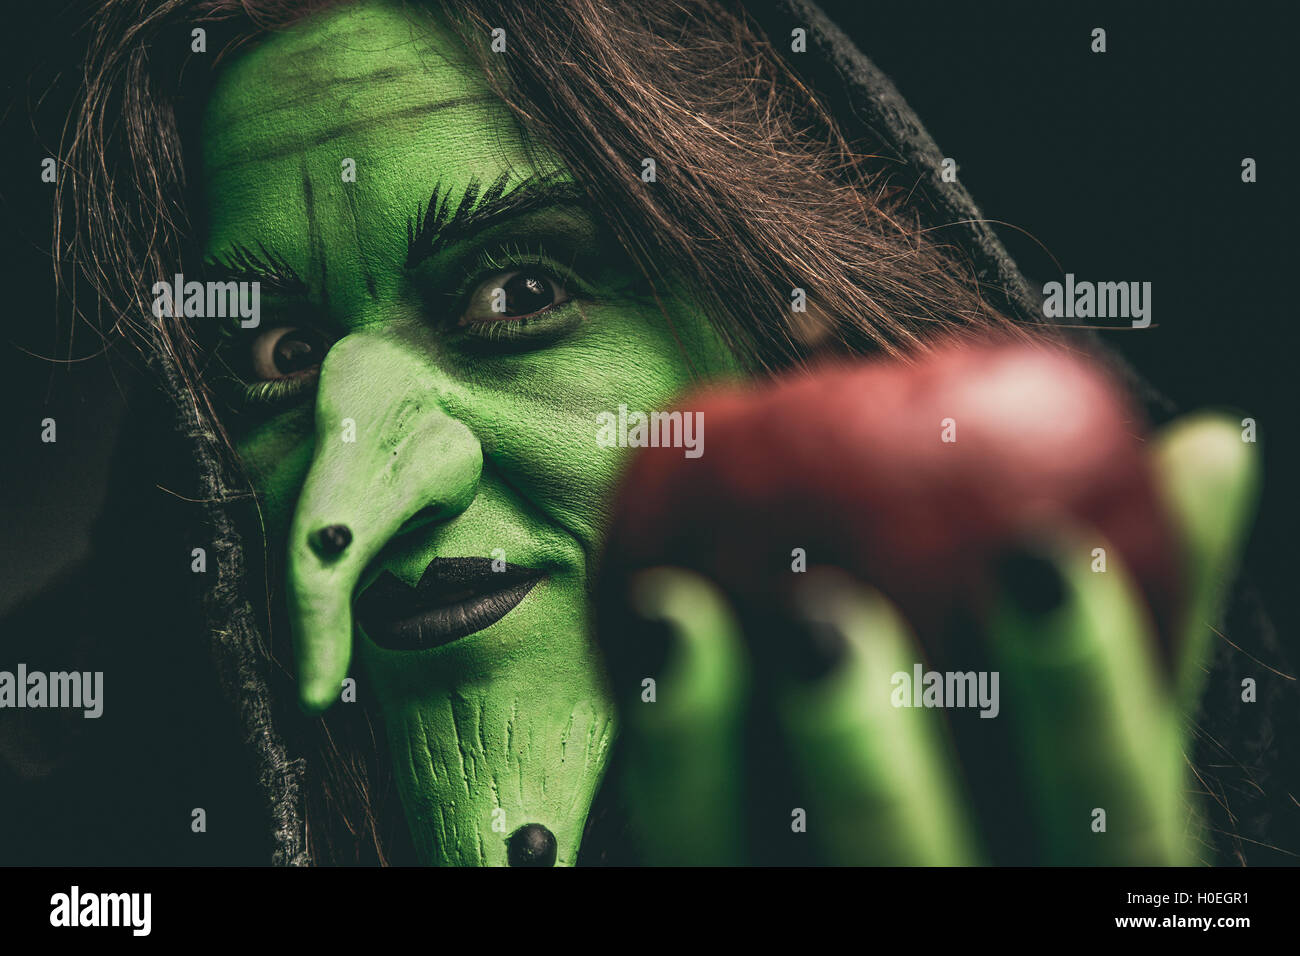 Green witch holding an apple in her hand. Shallow depth of field. Stock Photo